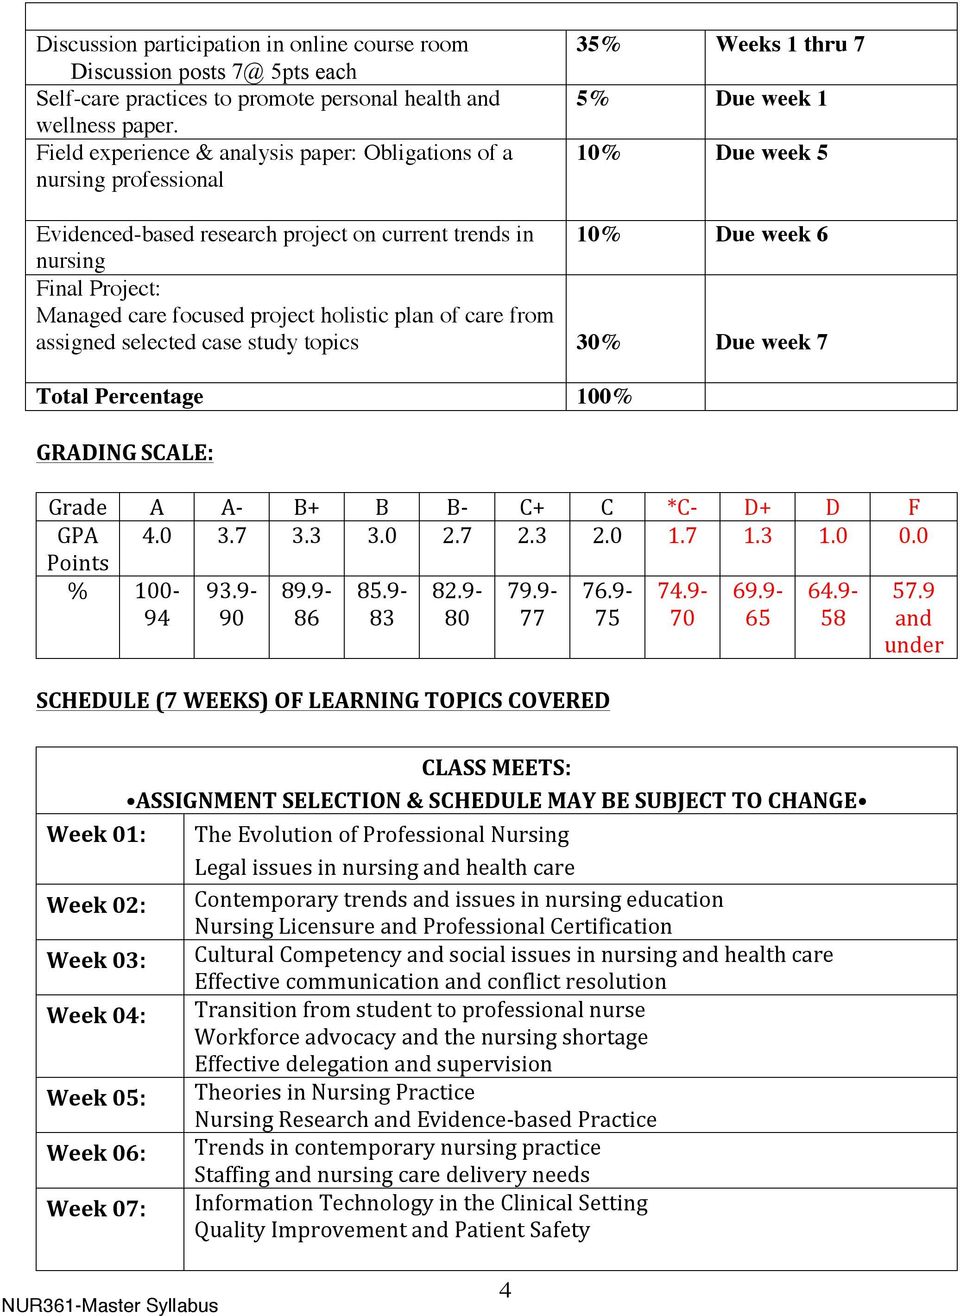 Final Project: Managed care focused project holistic plan of care from assigned selected case study topics 30% Due week 7 Total Percentage 100% GRADING SCALE: Grade A A- B+ B B- C+ C *C- D+ D F GPA 4.